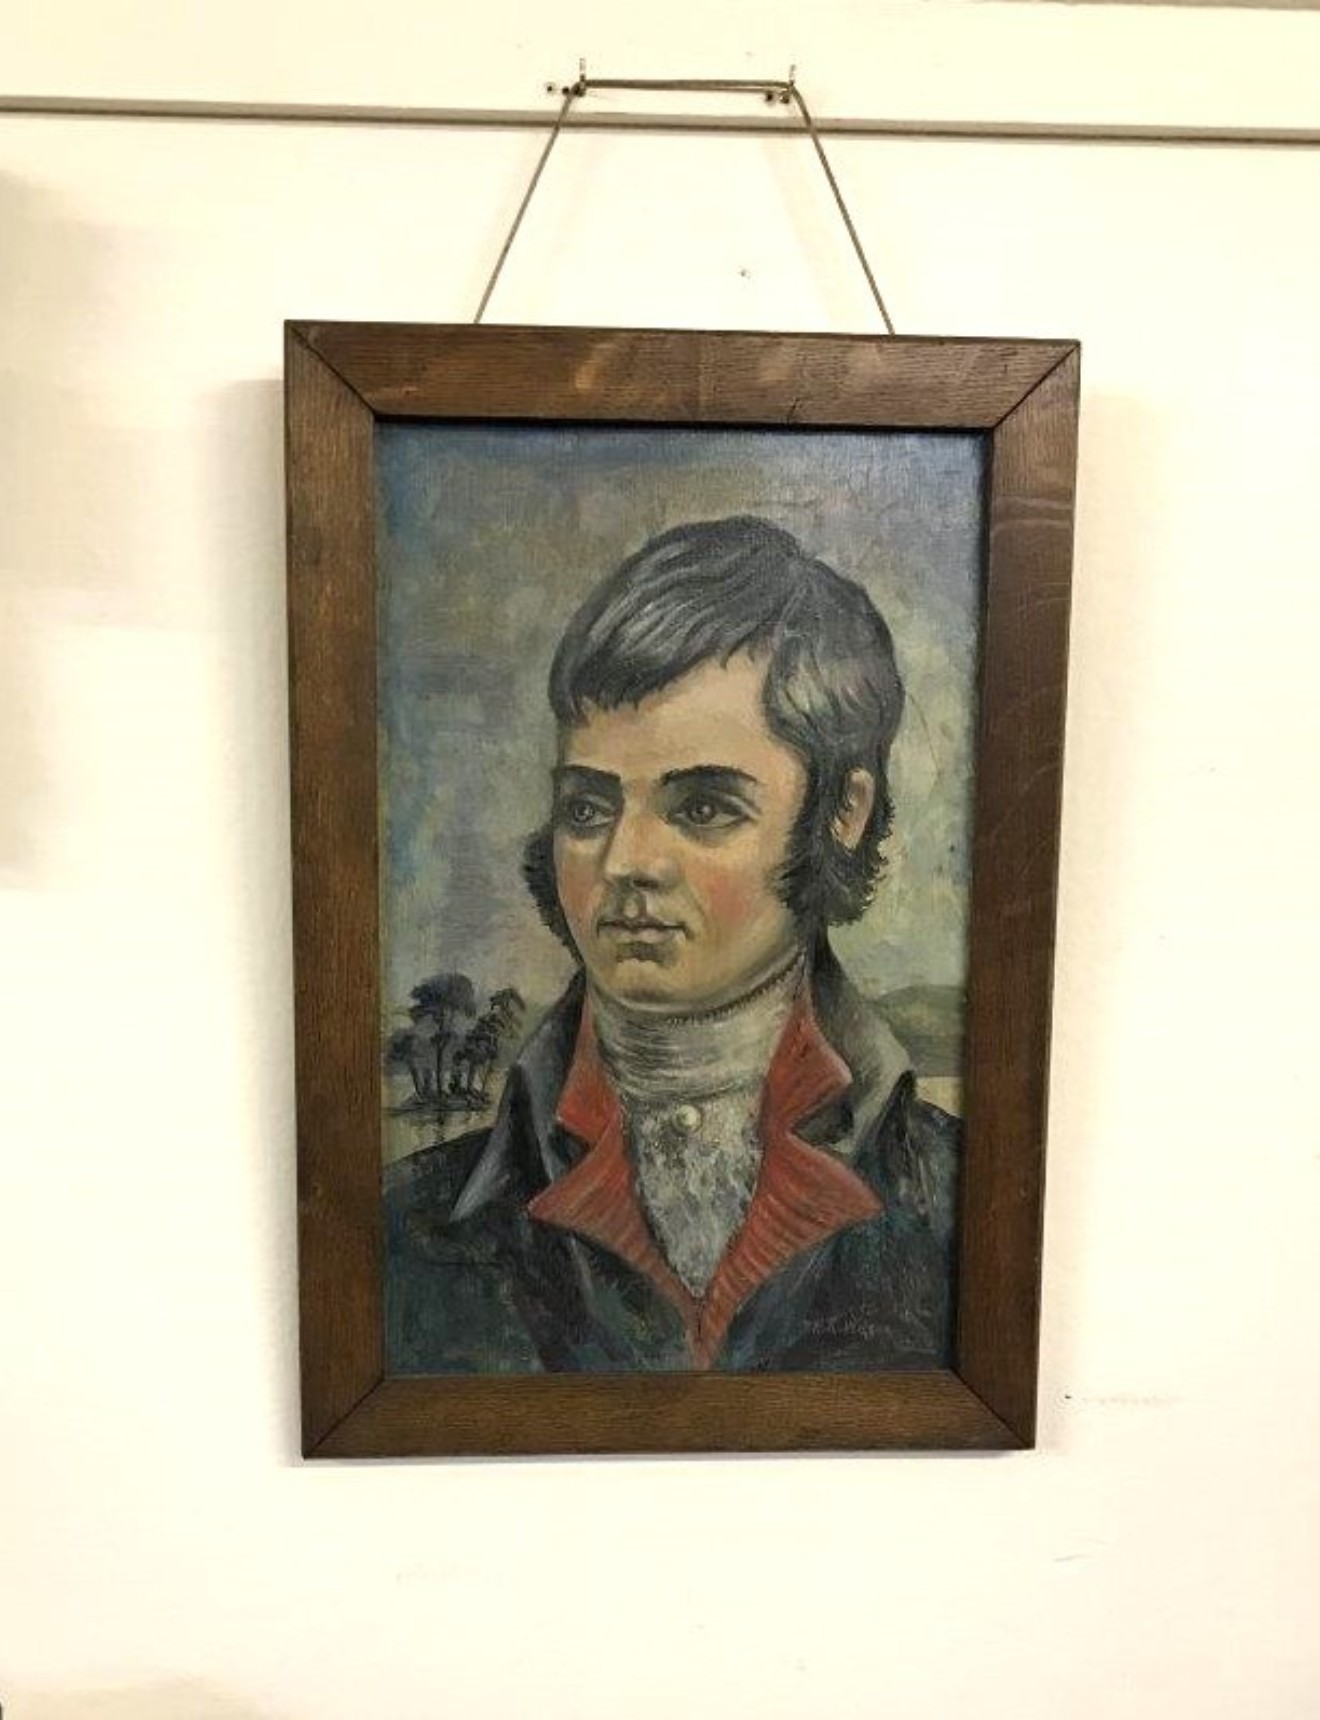 Vintage Oil Painting of Robert Burns Signed H R Wilson (After the Original by Alexander Nasmyth in 1787)